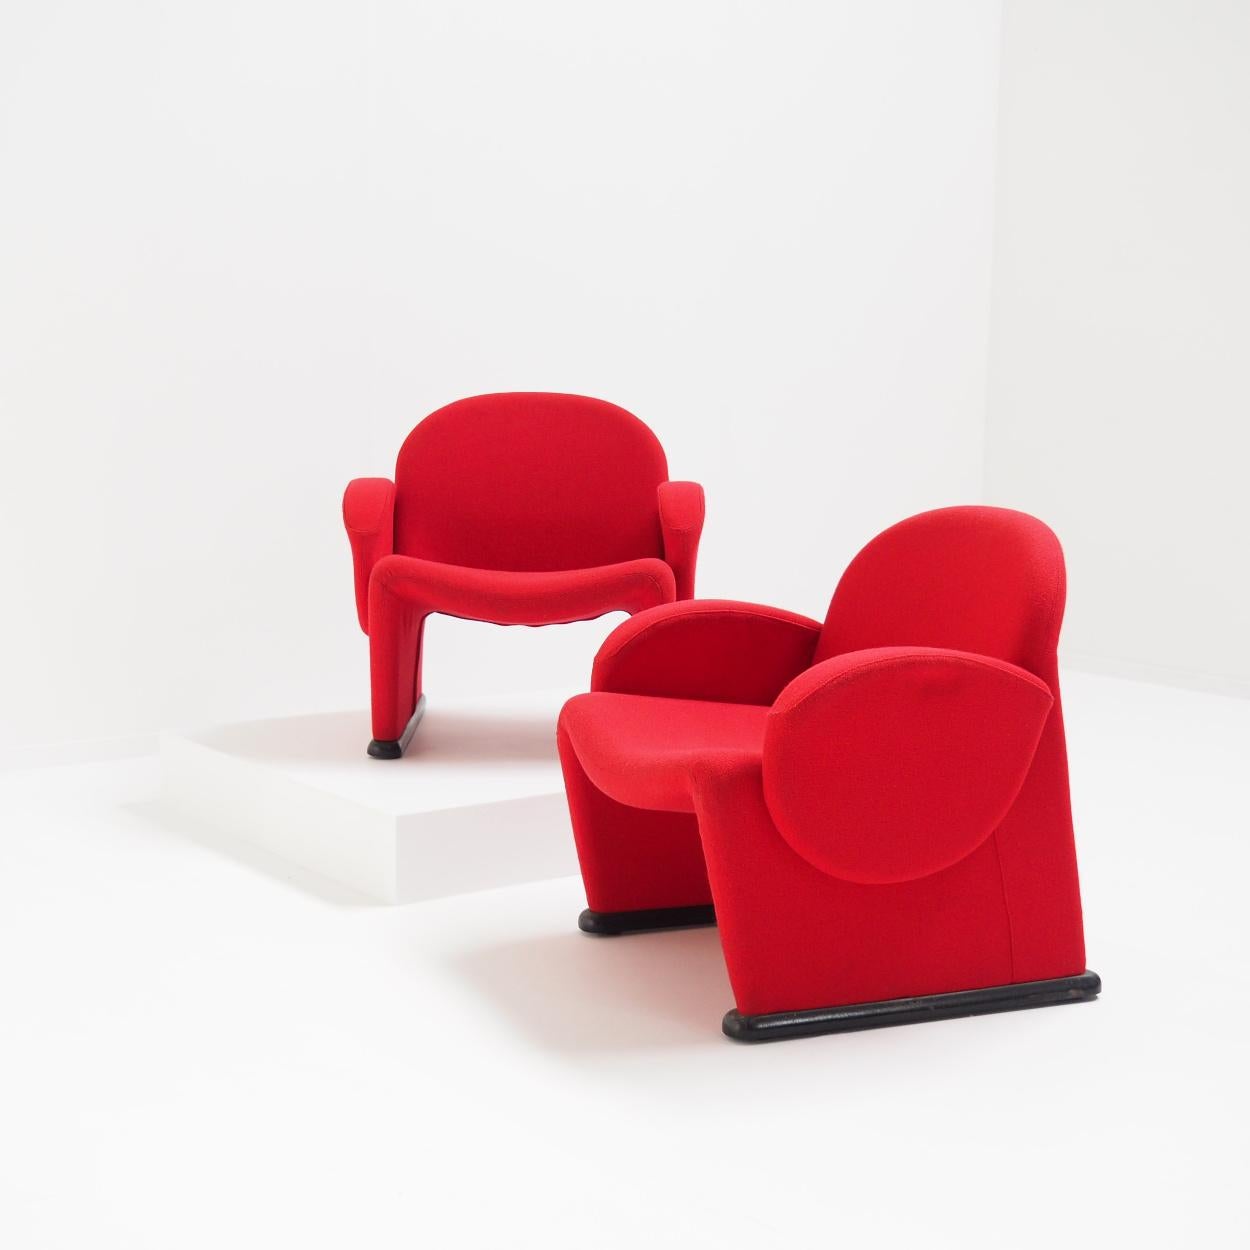 Pair of funky chairs very much in the style of Pierre Paulin and his 